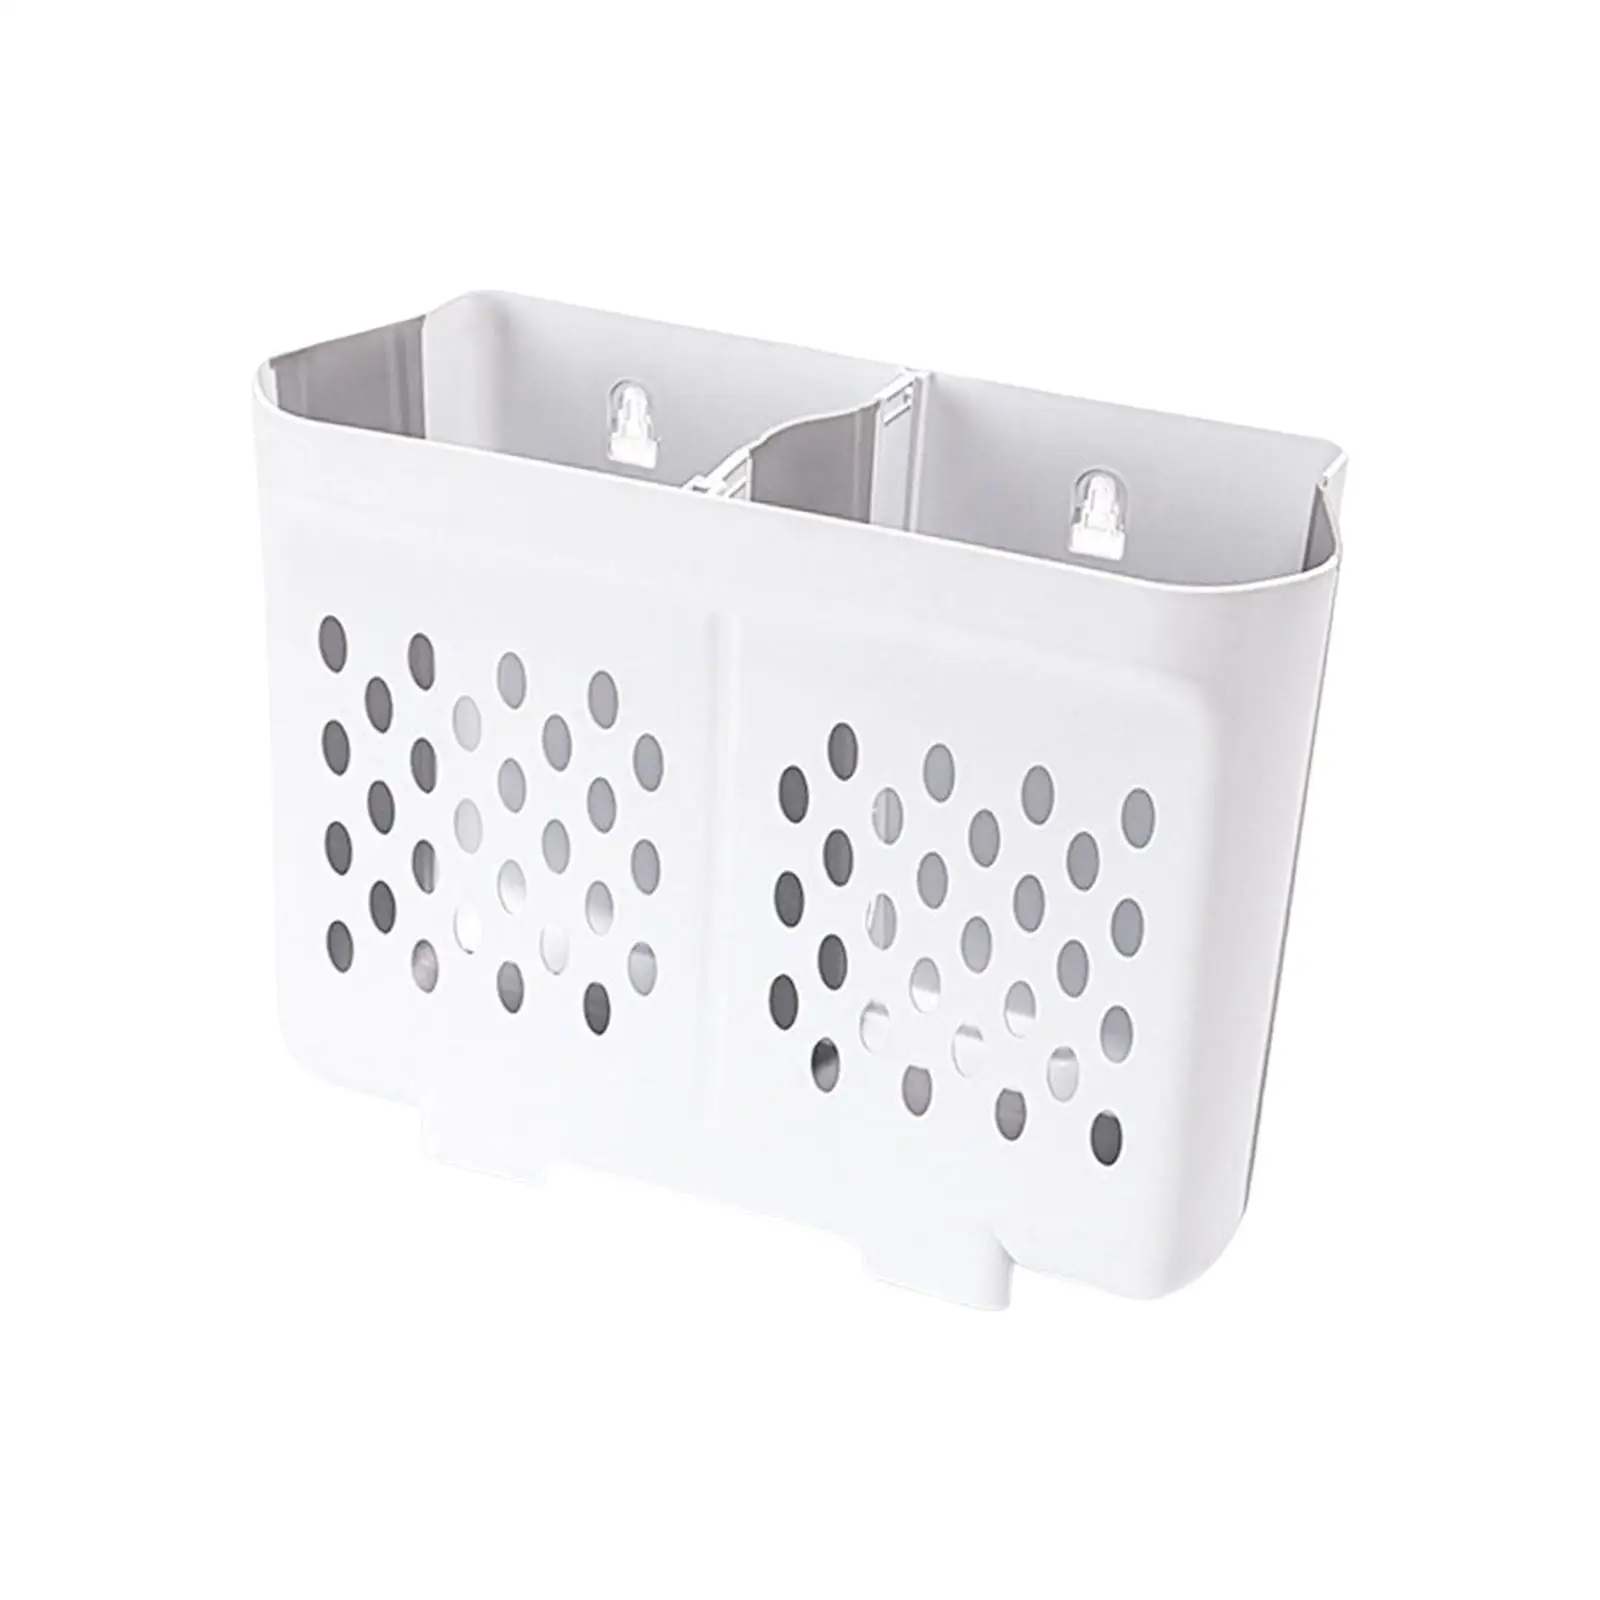 Multifunctional Collapsible Laundry Storage Basket Wall Mount Hollow Design Accessory for College Dorms, Campers Easily Install